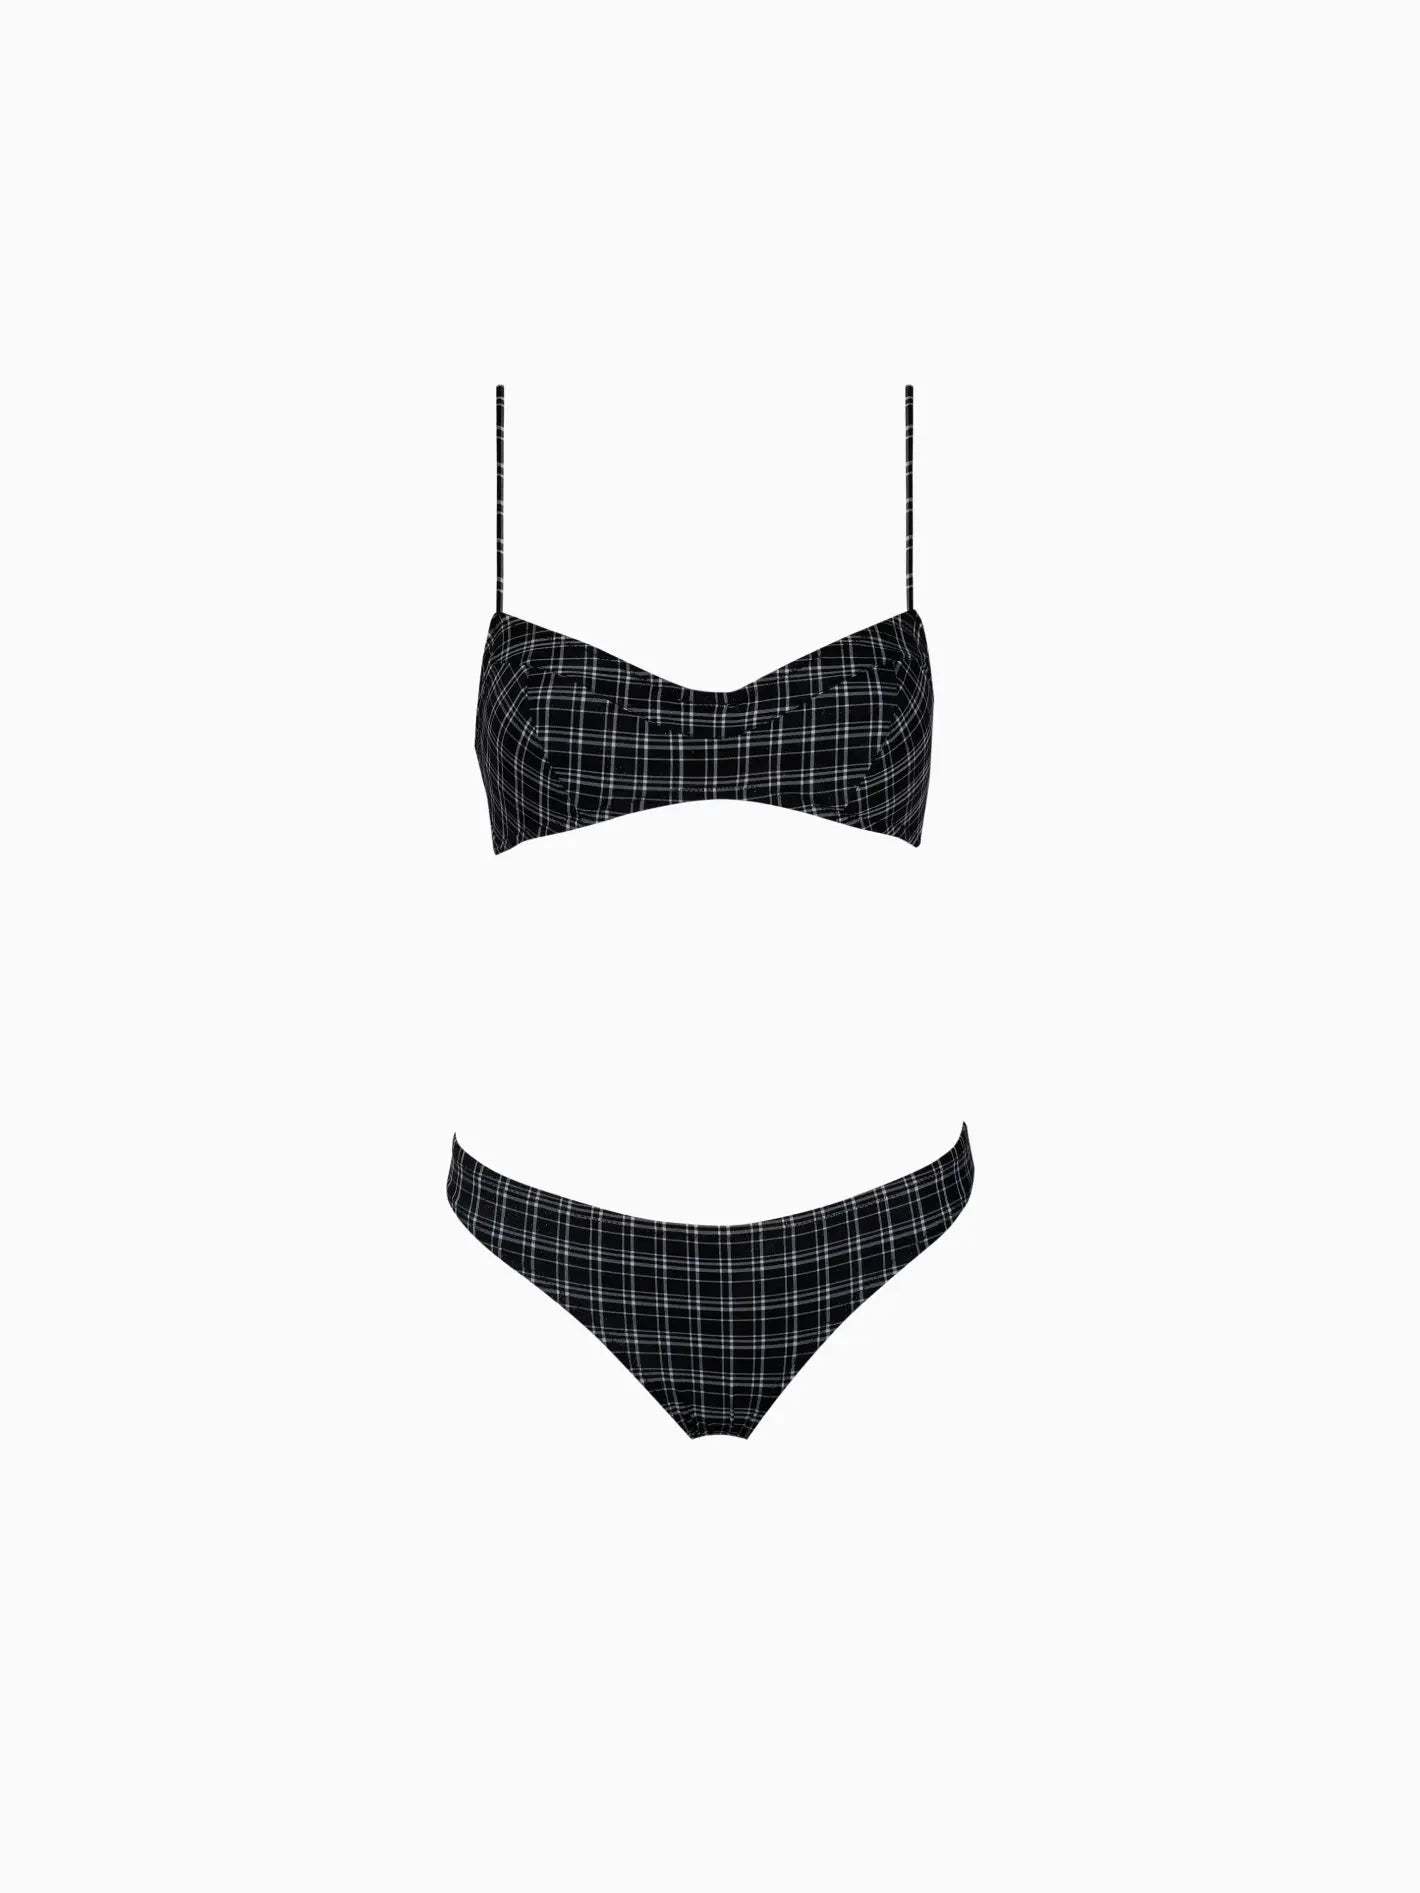 A Marais Bikini B&W by Pale set against a white background, available at Bassalstore. The top has thin shoulder straps and a straight neckline, while the bottoms have a classic bikini cut, both featuring a black and white plaid pattern. Perfect for your next Barcelona getaway.